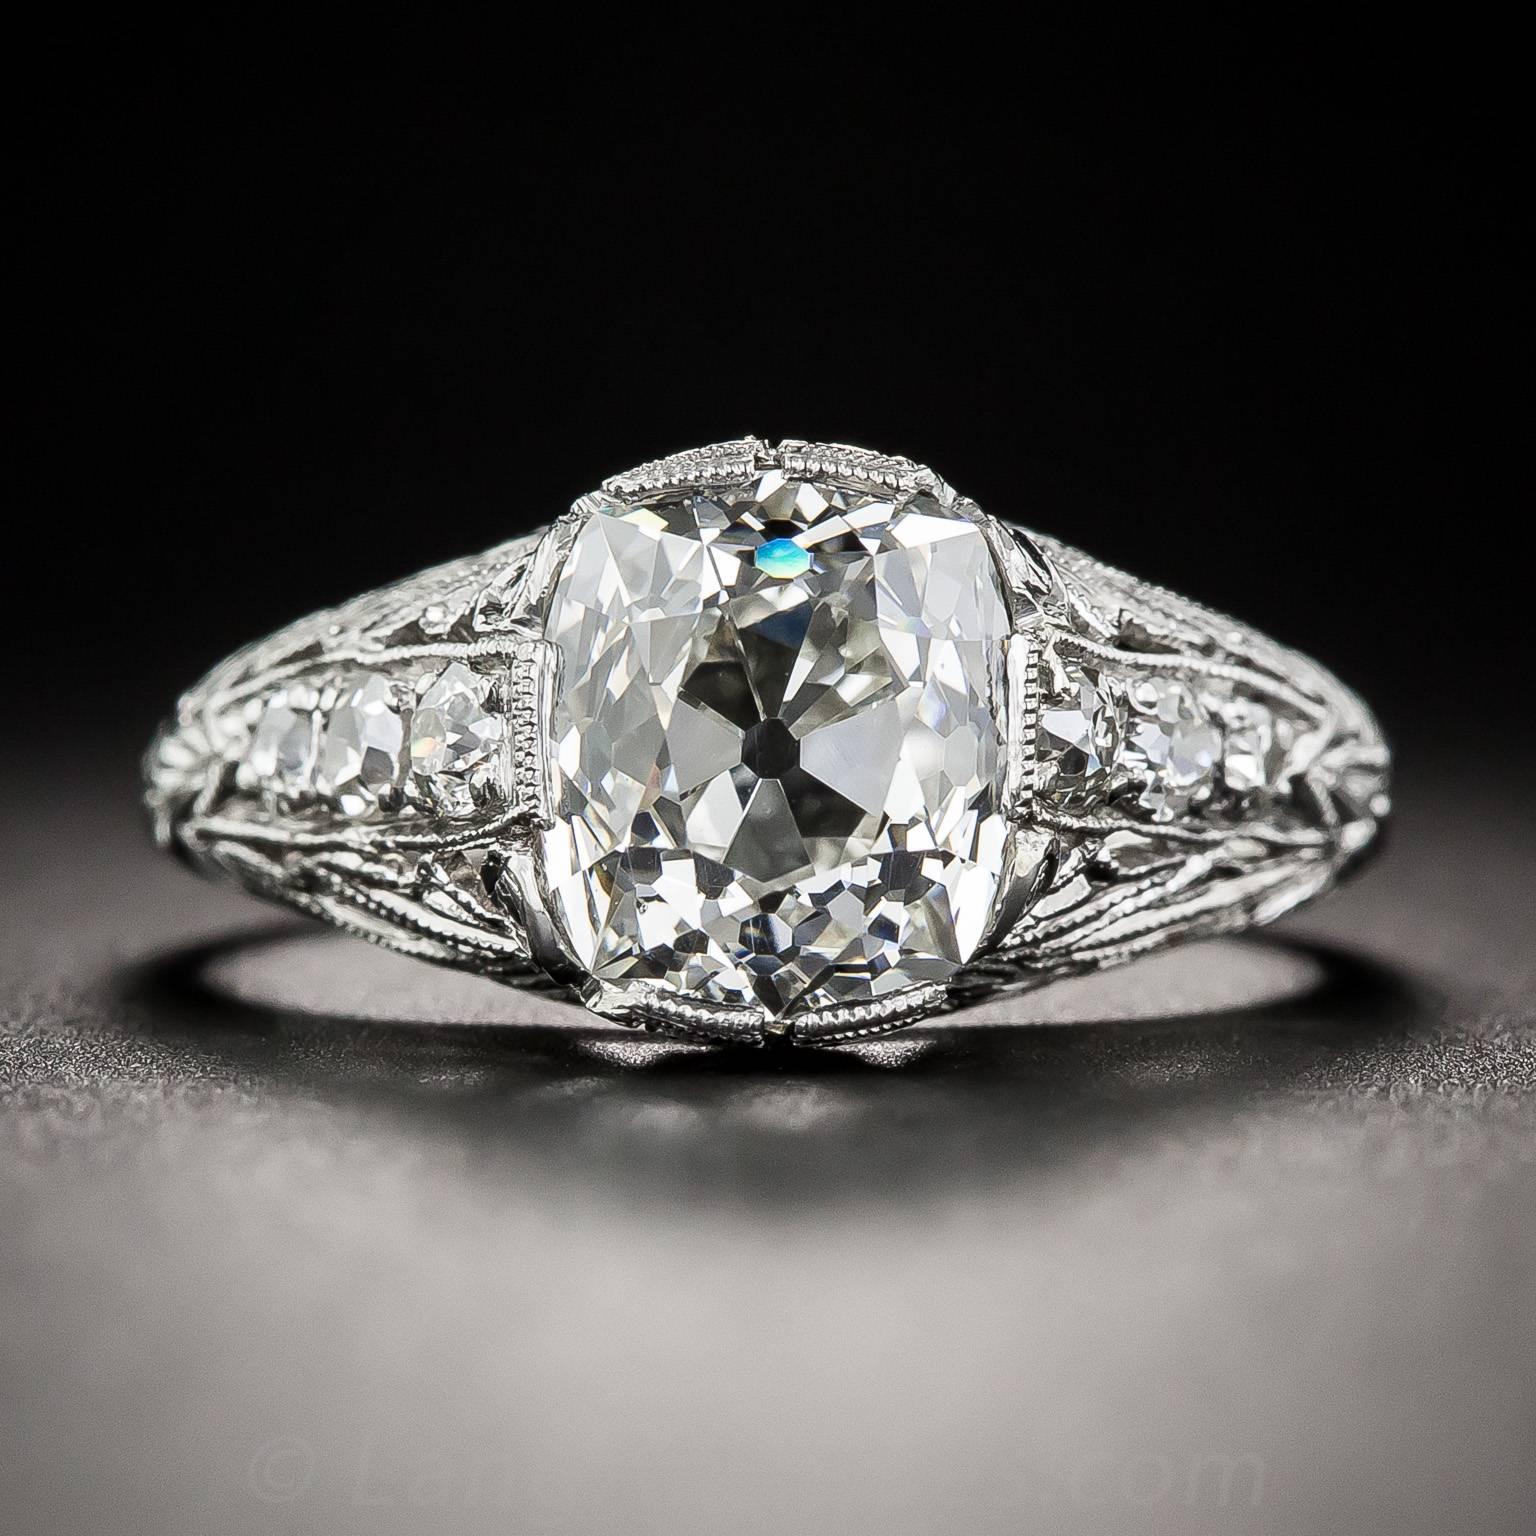 This seriously sparkling original Art Deco jewel, circa 1920s, sizzles front and center with a gorgeous, bright-white antique cushion-cut diamond, weighing 2.69 carats and accompanied with a GIA Diamond Grading Report stating: I color - SI1 clarity.